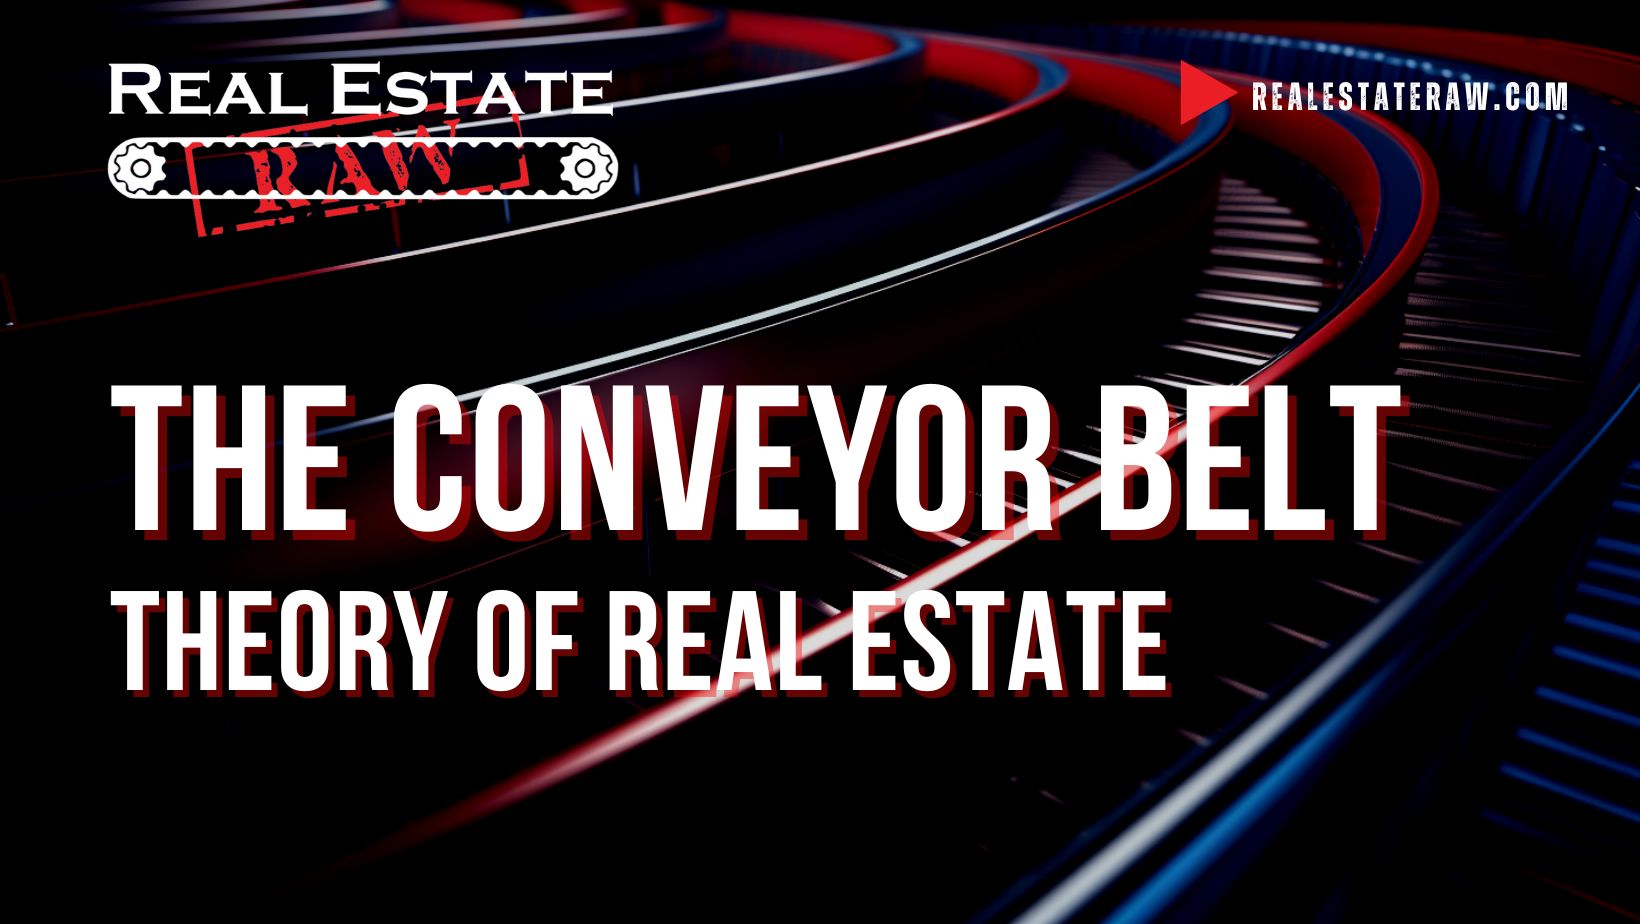 The Conveyor Belt Theory of Real Estate